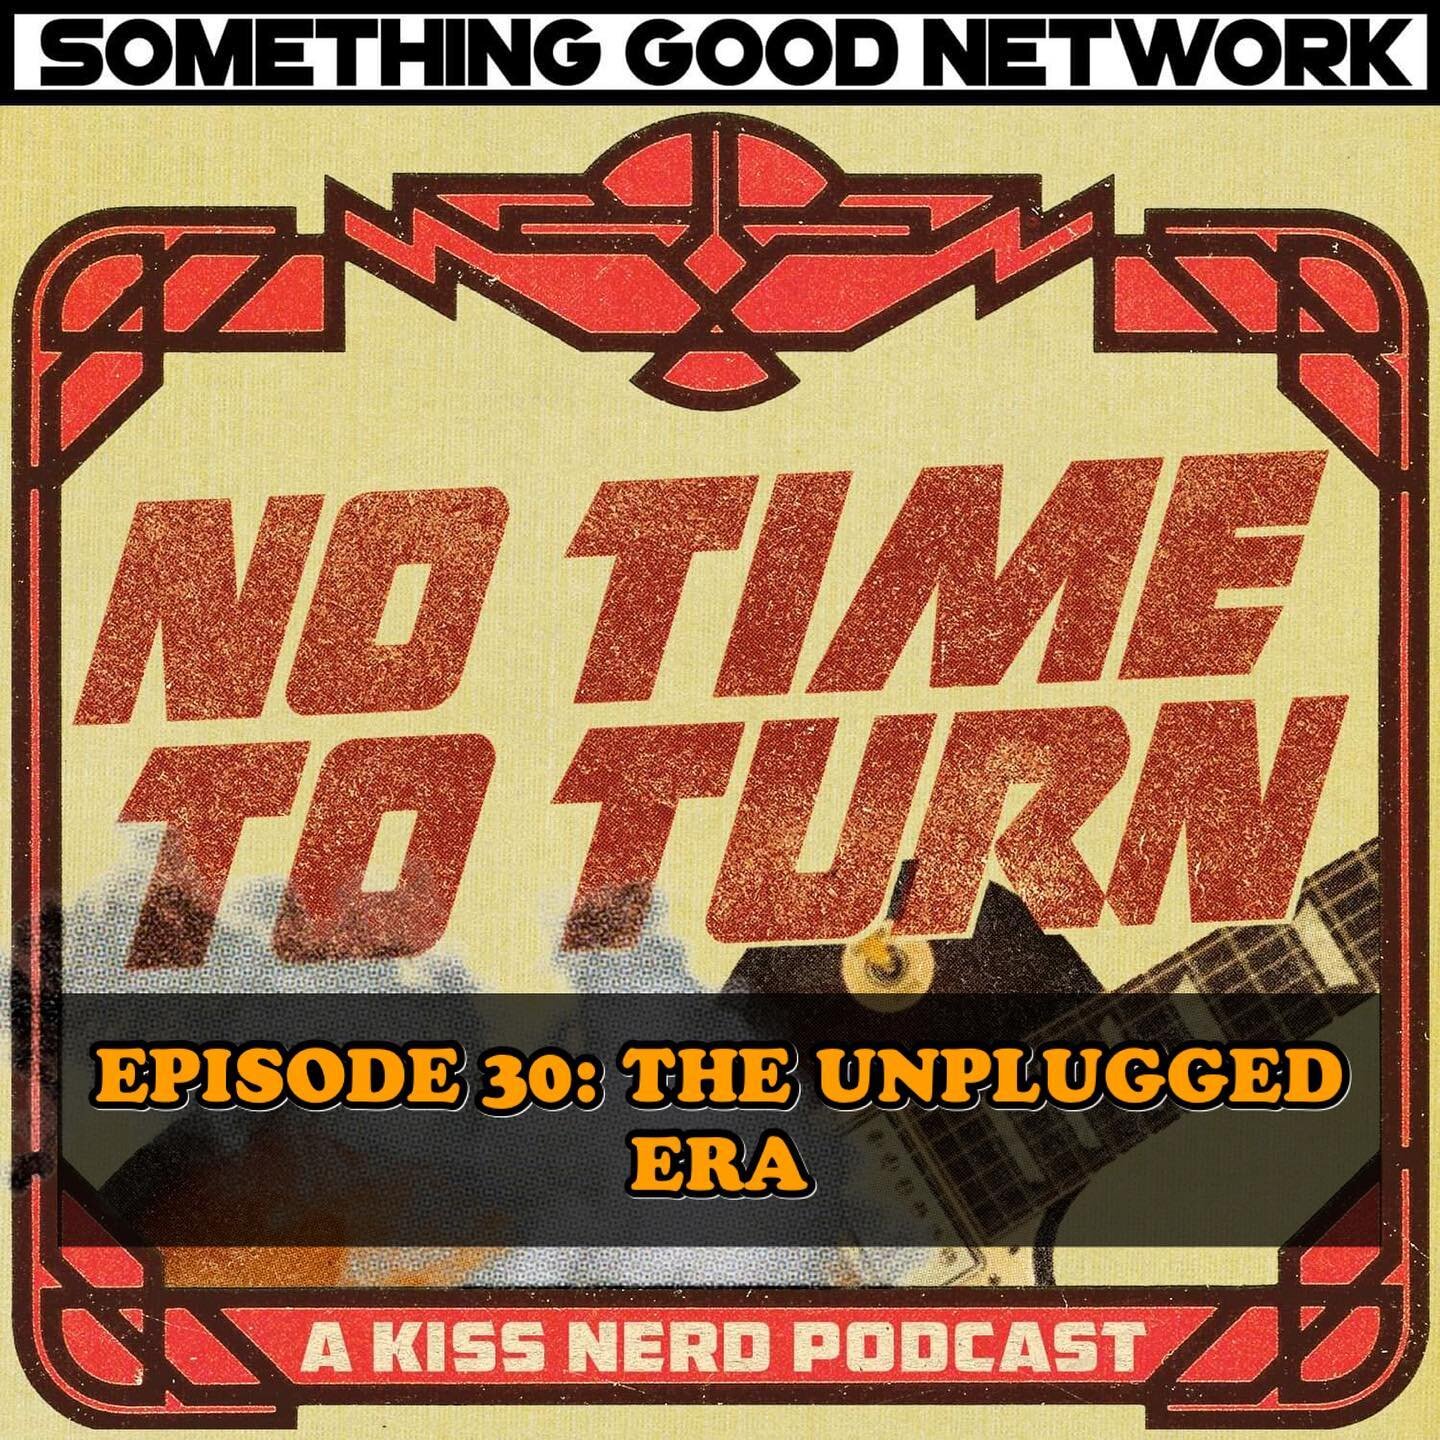 Did you catch the new episode of 🔥NO TIME TO TURN🔥 that dropped Monday? Hit that link in the bio and tune on in!
✨✨✨
The band adopt a &quot;do-it-yourself&quot; approach staging a run of self-promoted fan conventions with a run of acoustic sets pav